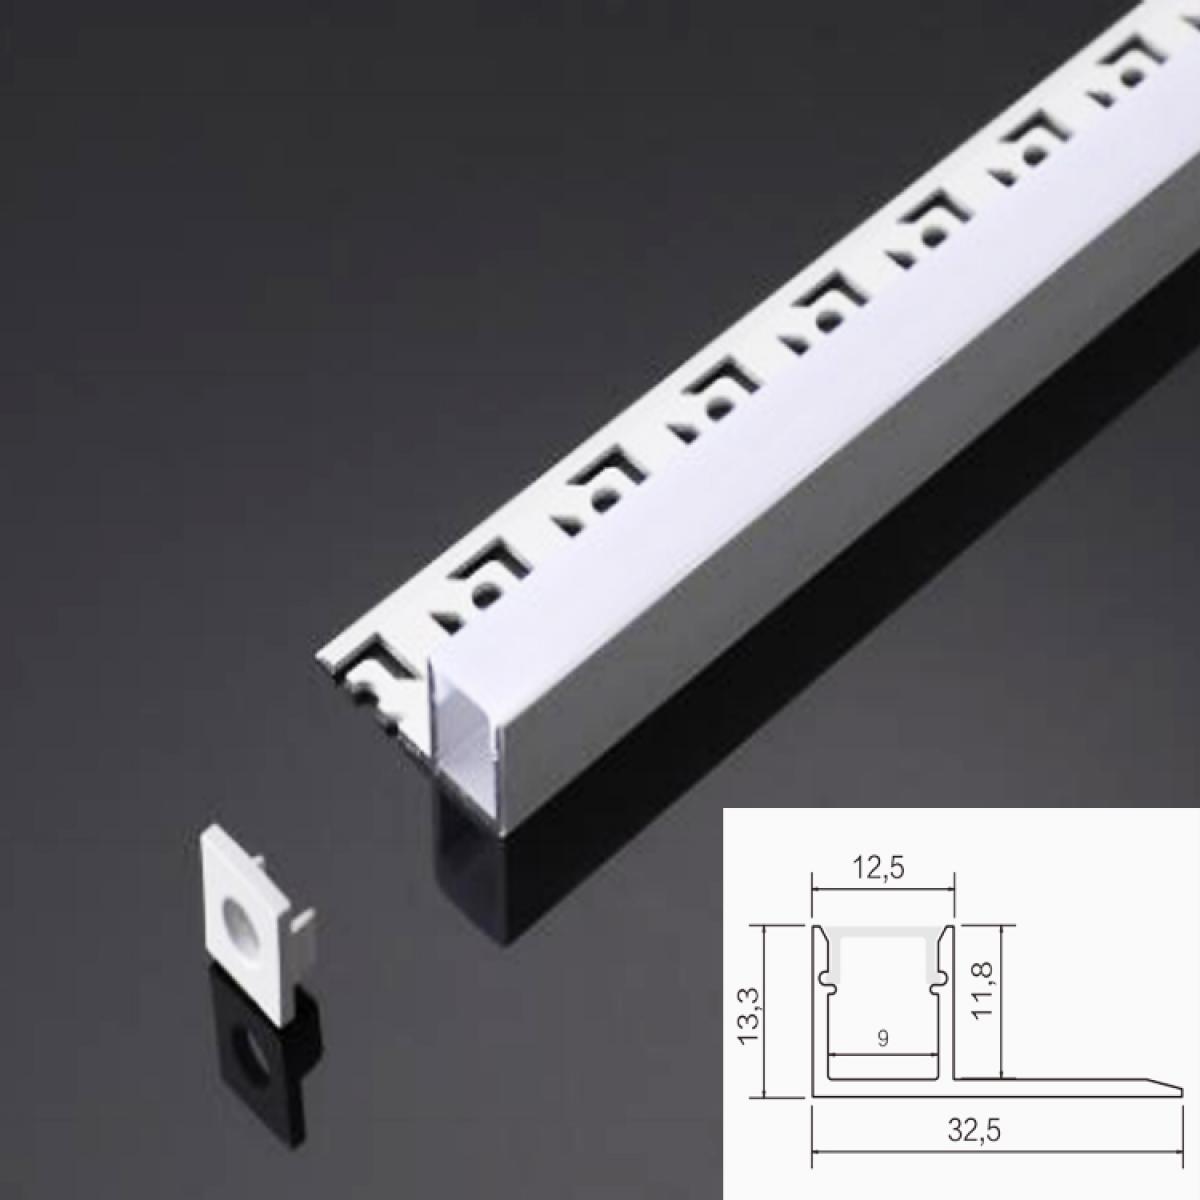 TXN-032 LX32X13MM Popular Extrusion Aluminum Led Profile For 2835Smd 120Leds/M Hightness Strips Used For Ceiling Or Wall